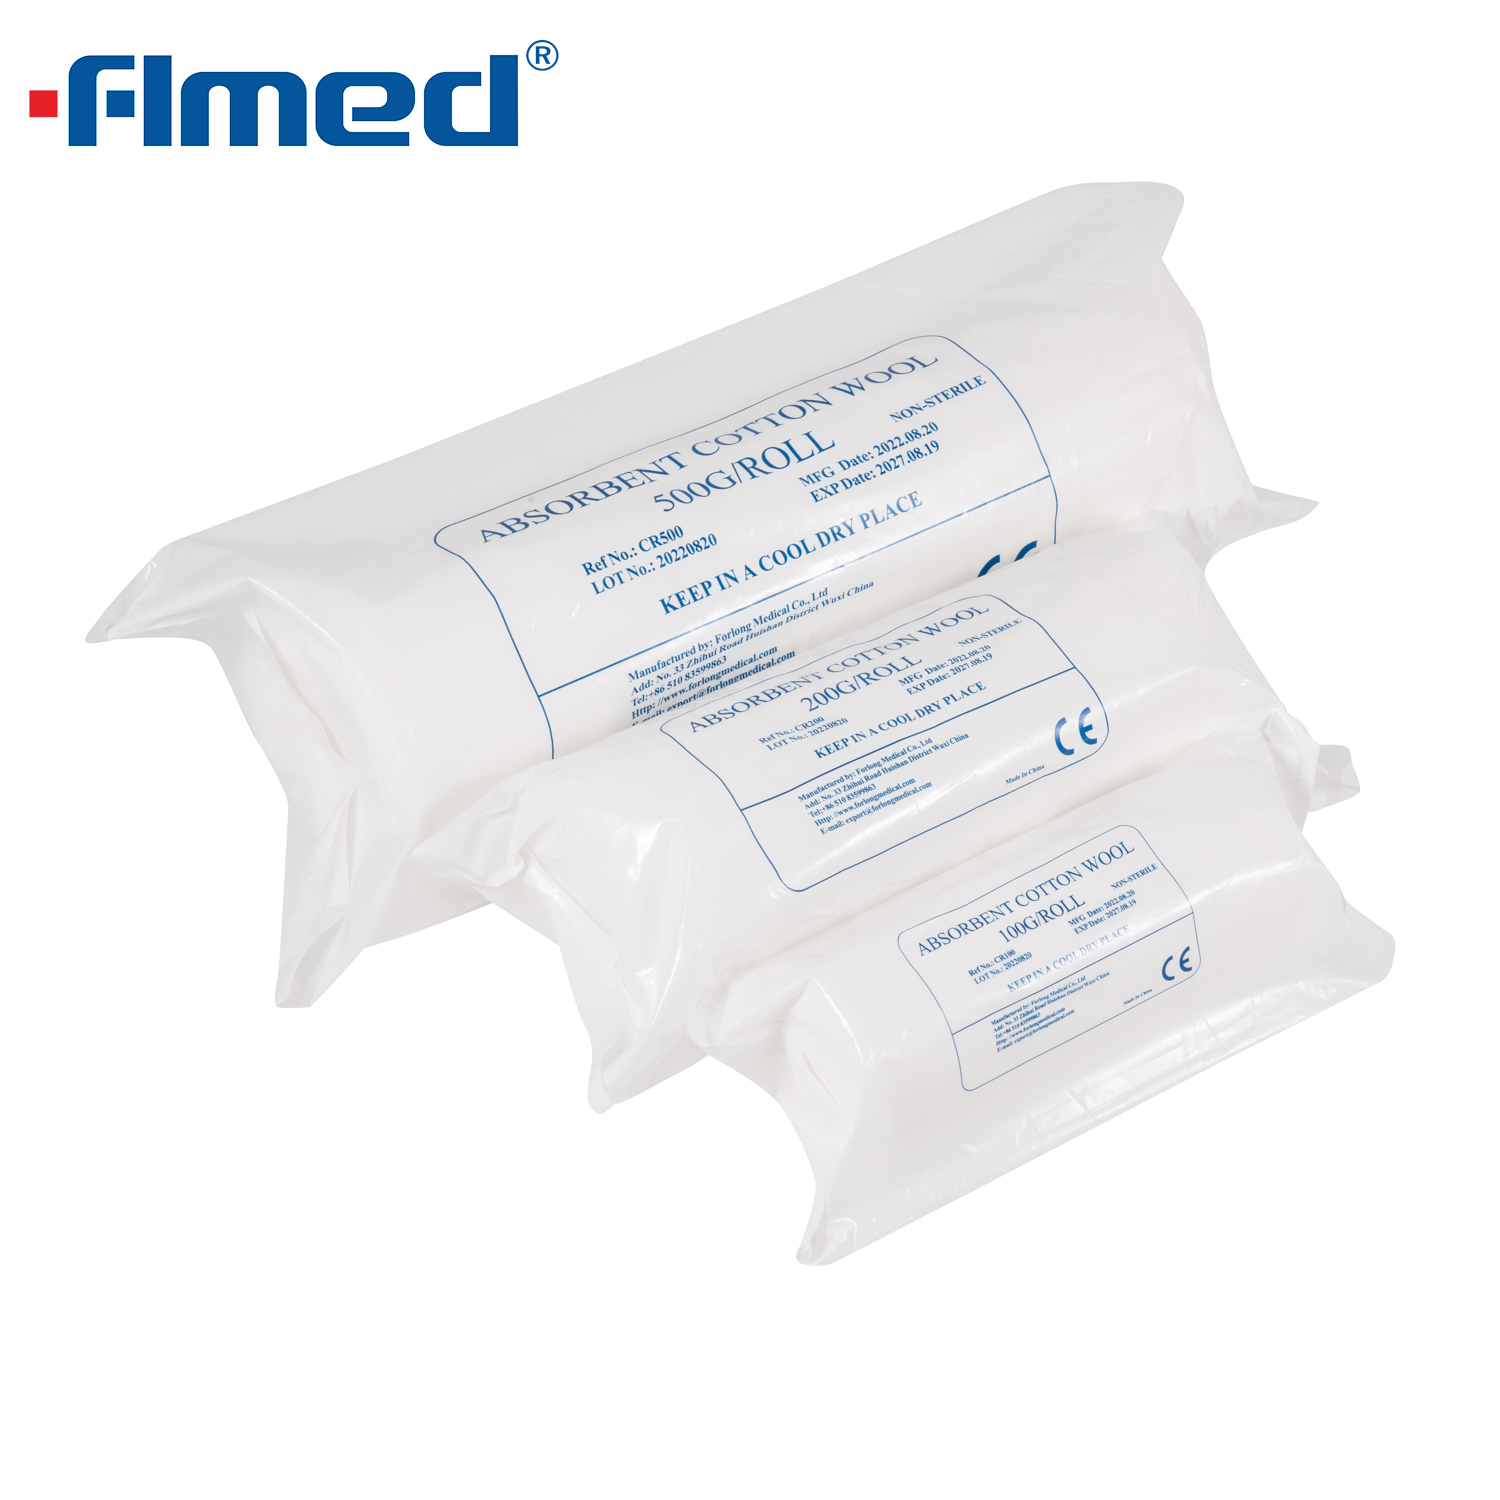 Cotton Wool Roll: Versatile and Essential in Wound Care